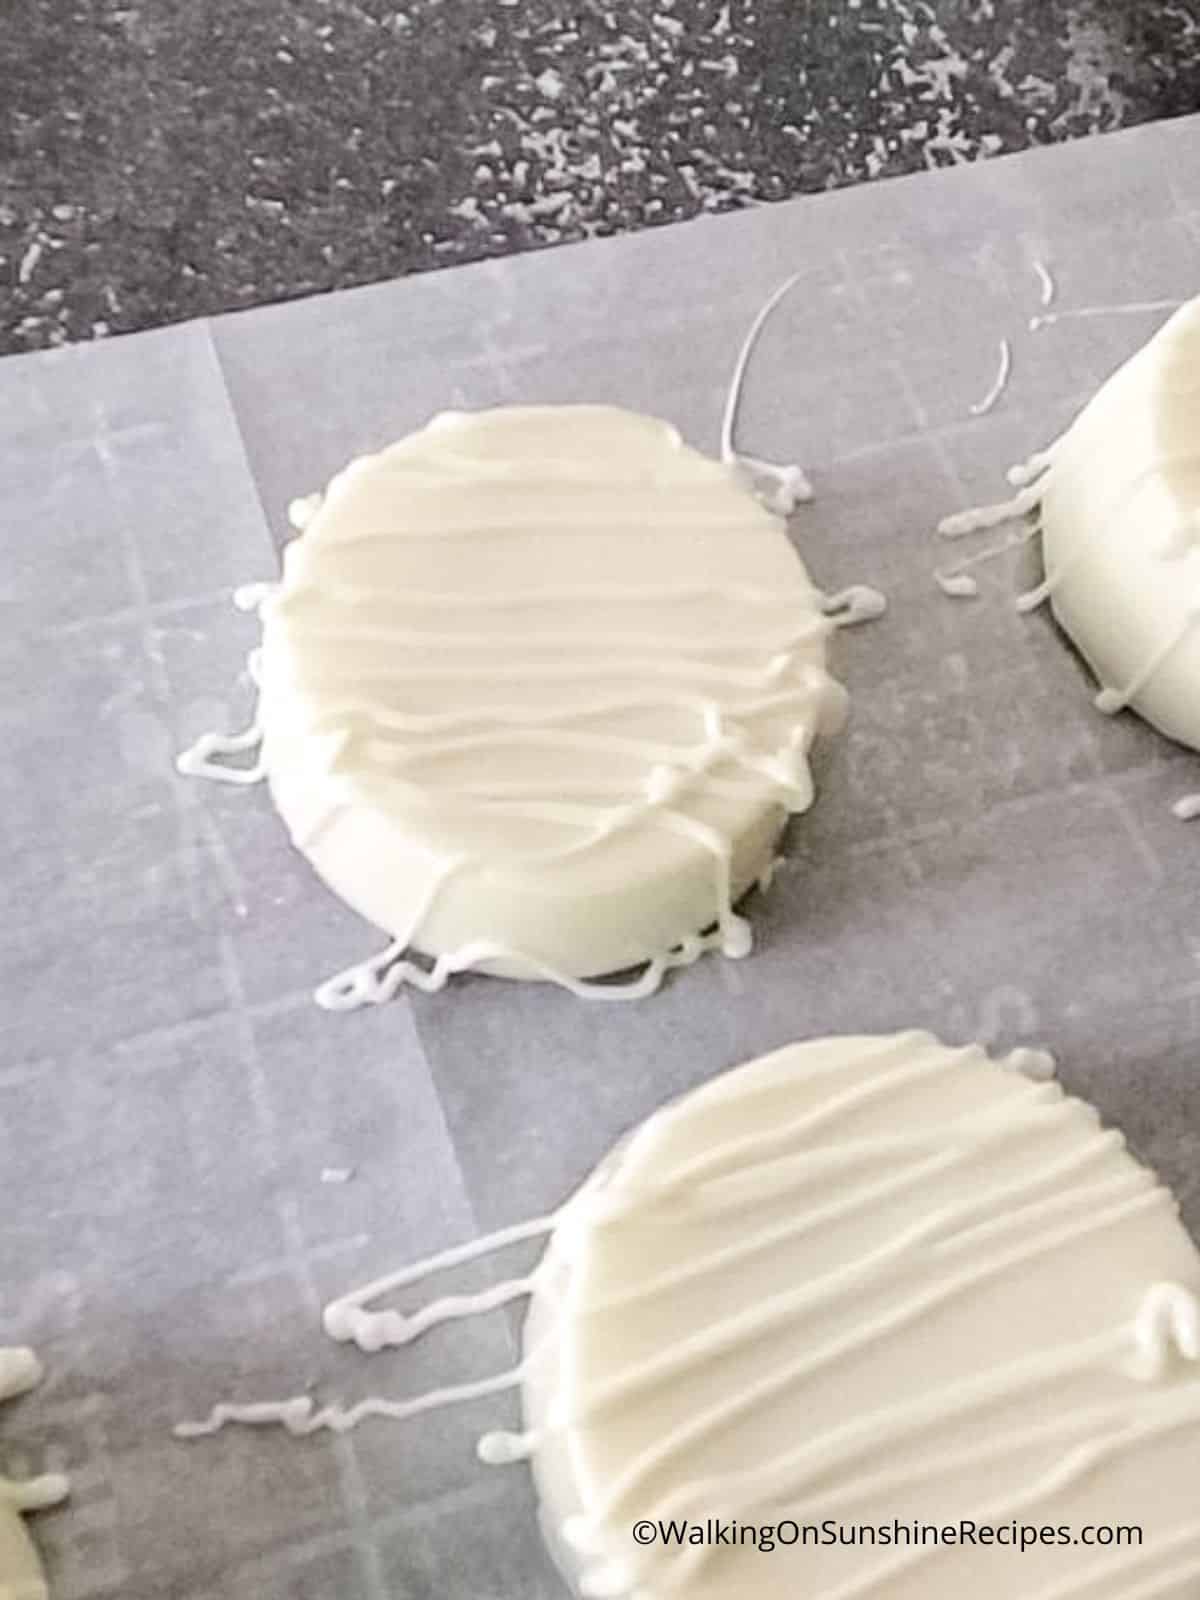 drizzle melted chocolate on top of white chocolate covered Oreo cookies.